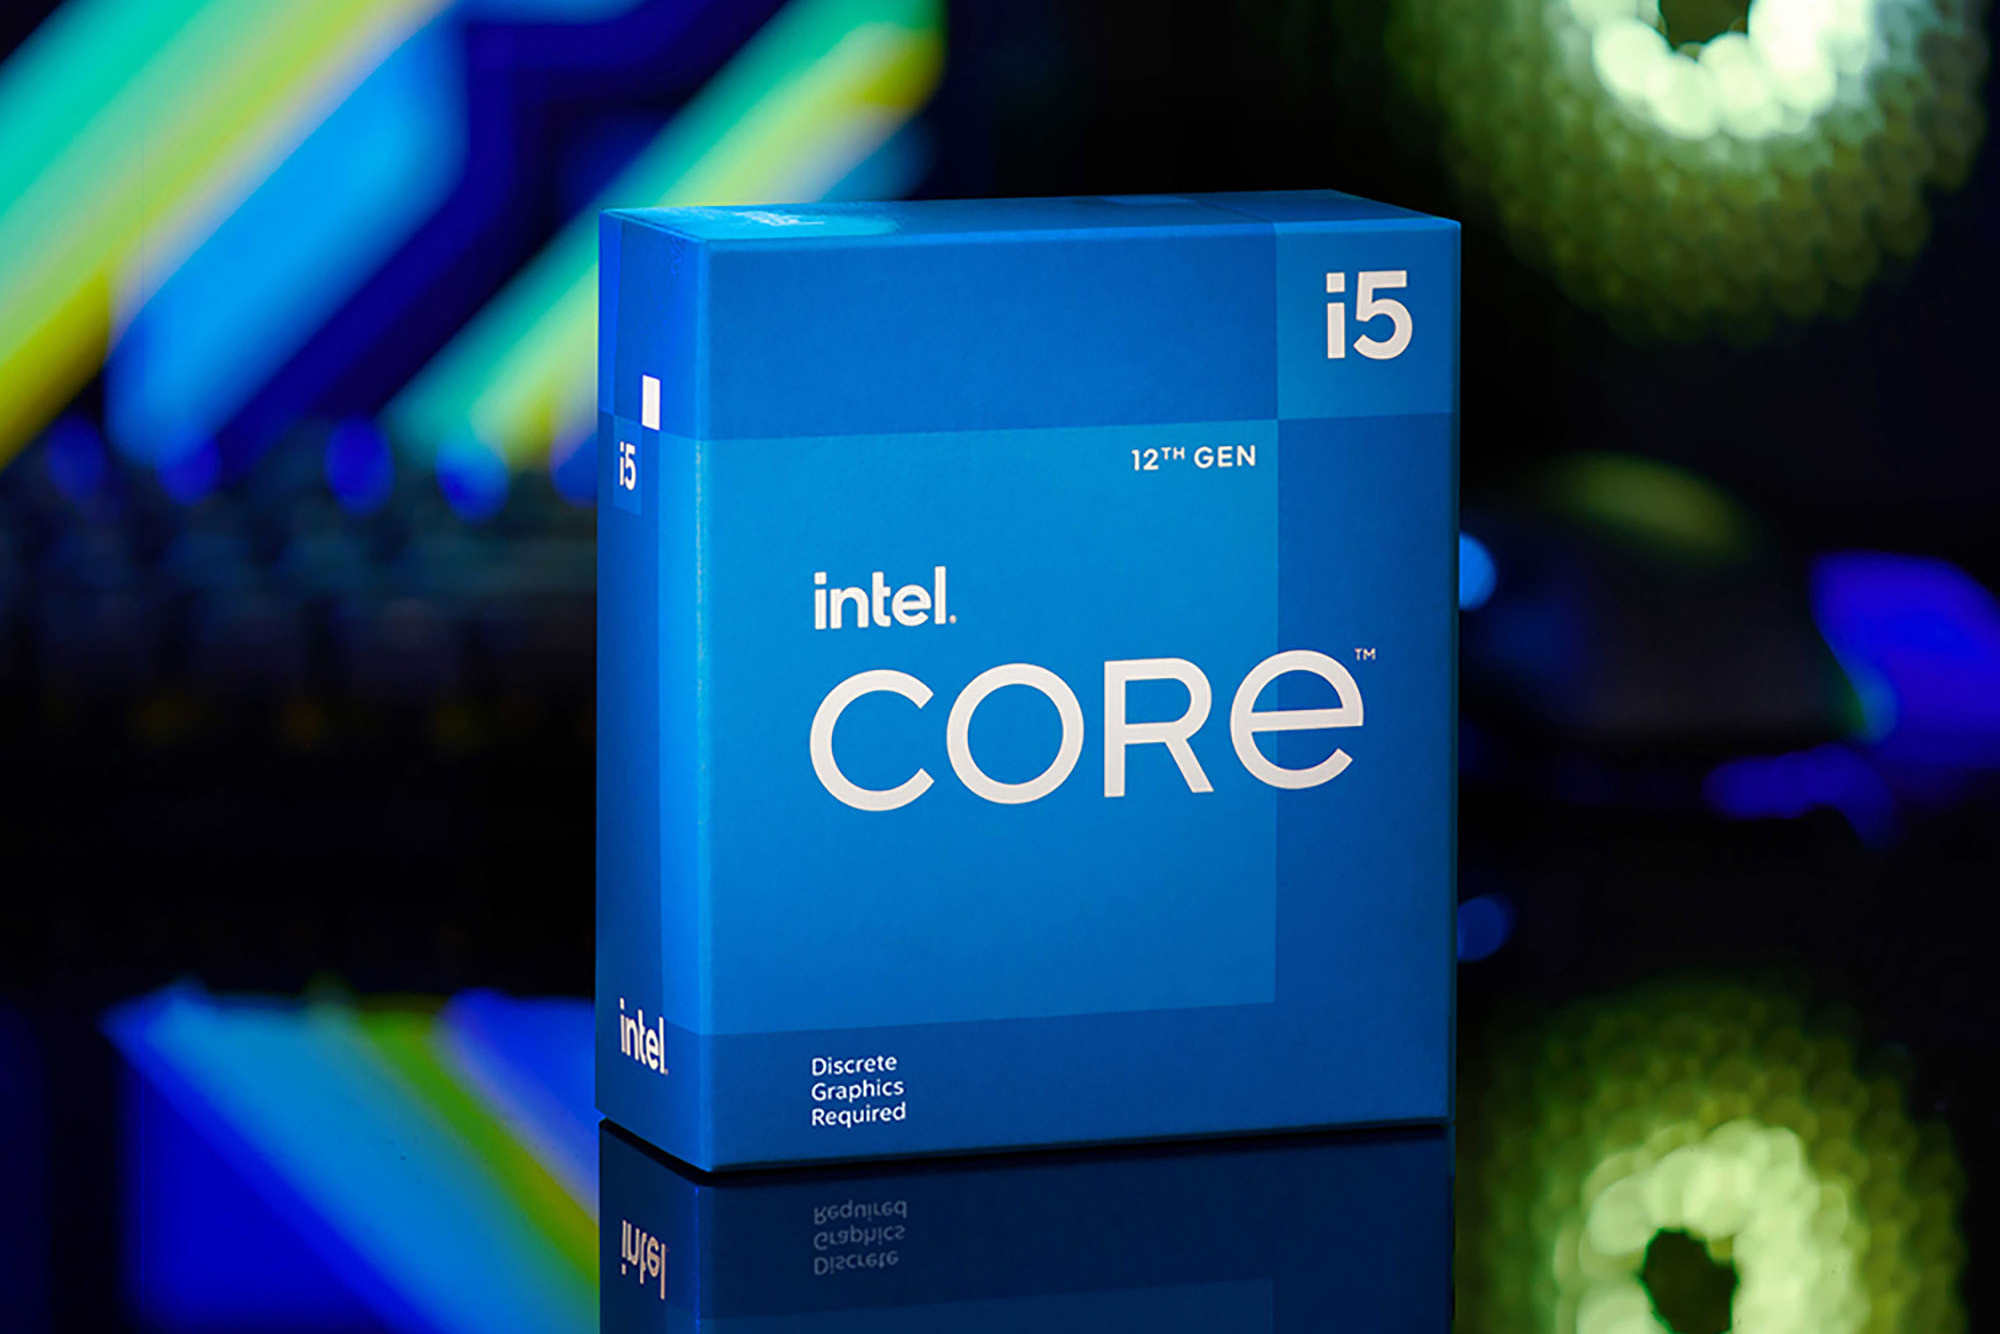 Review: Intel Core i5-13500 - The last word: - Overclocking.com